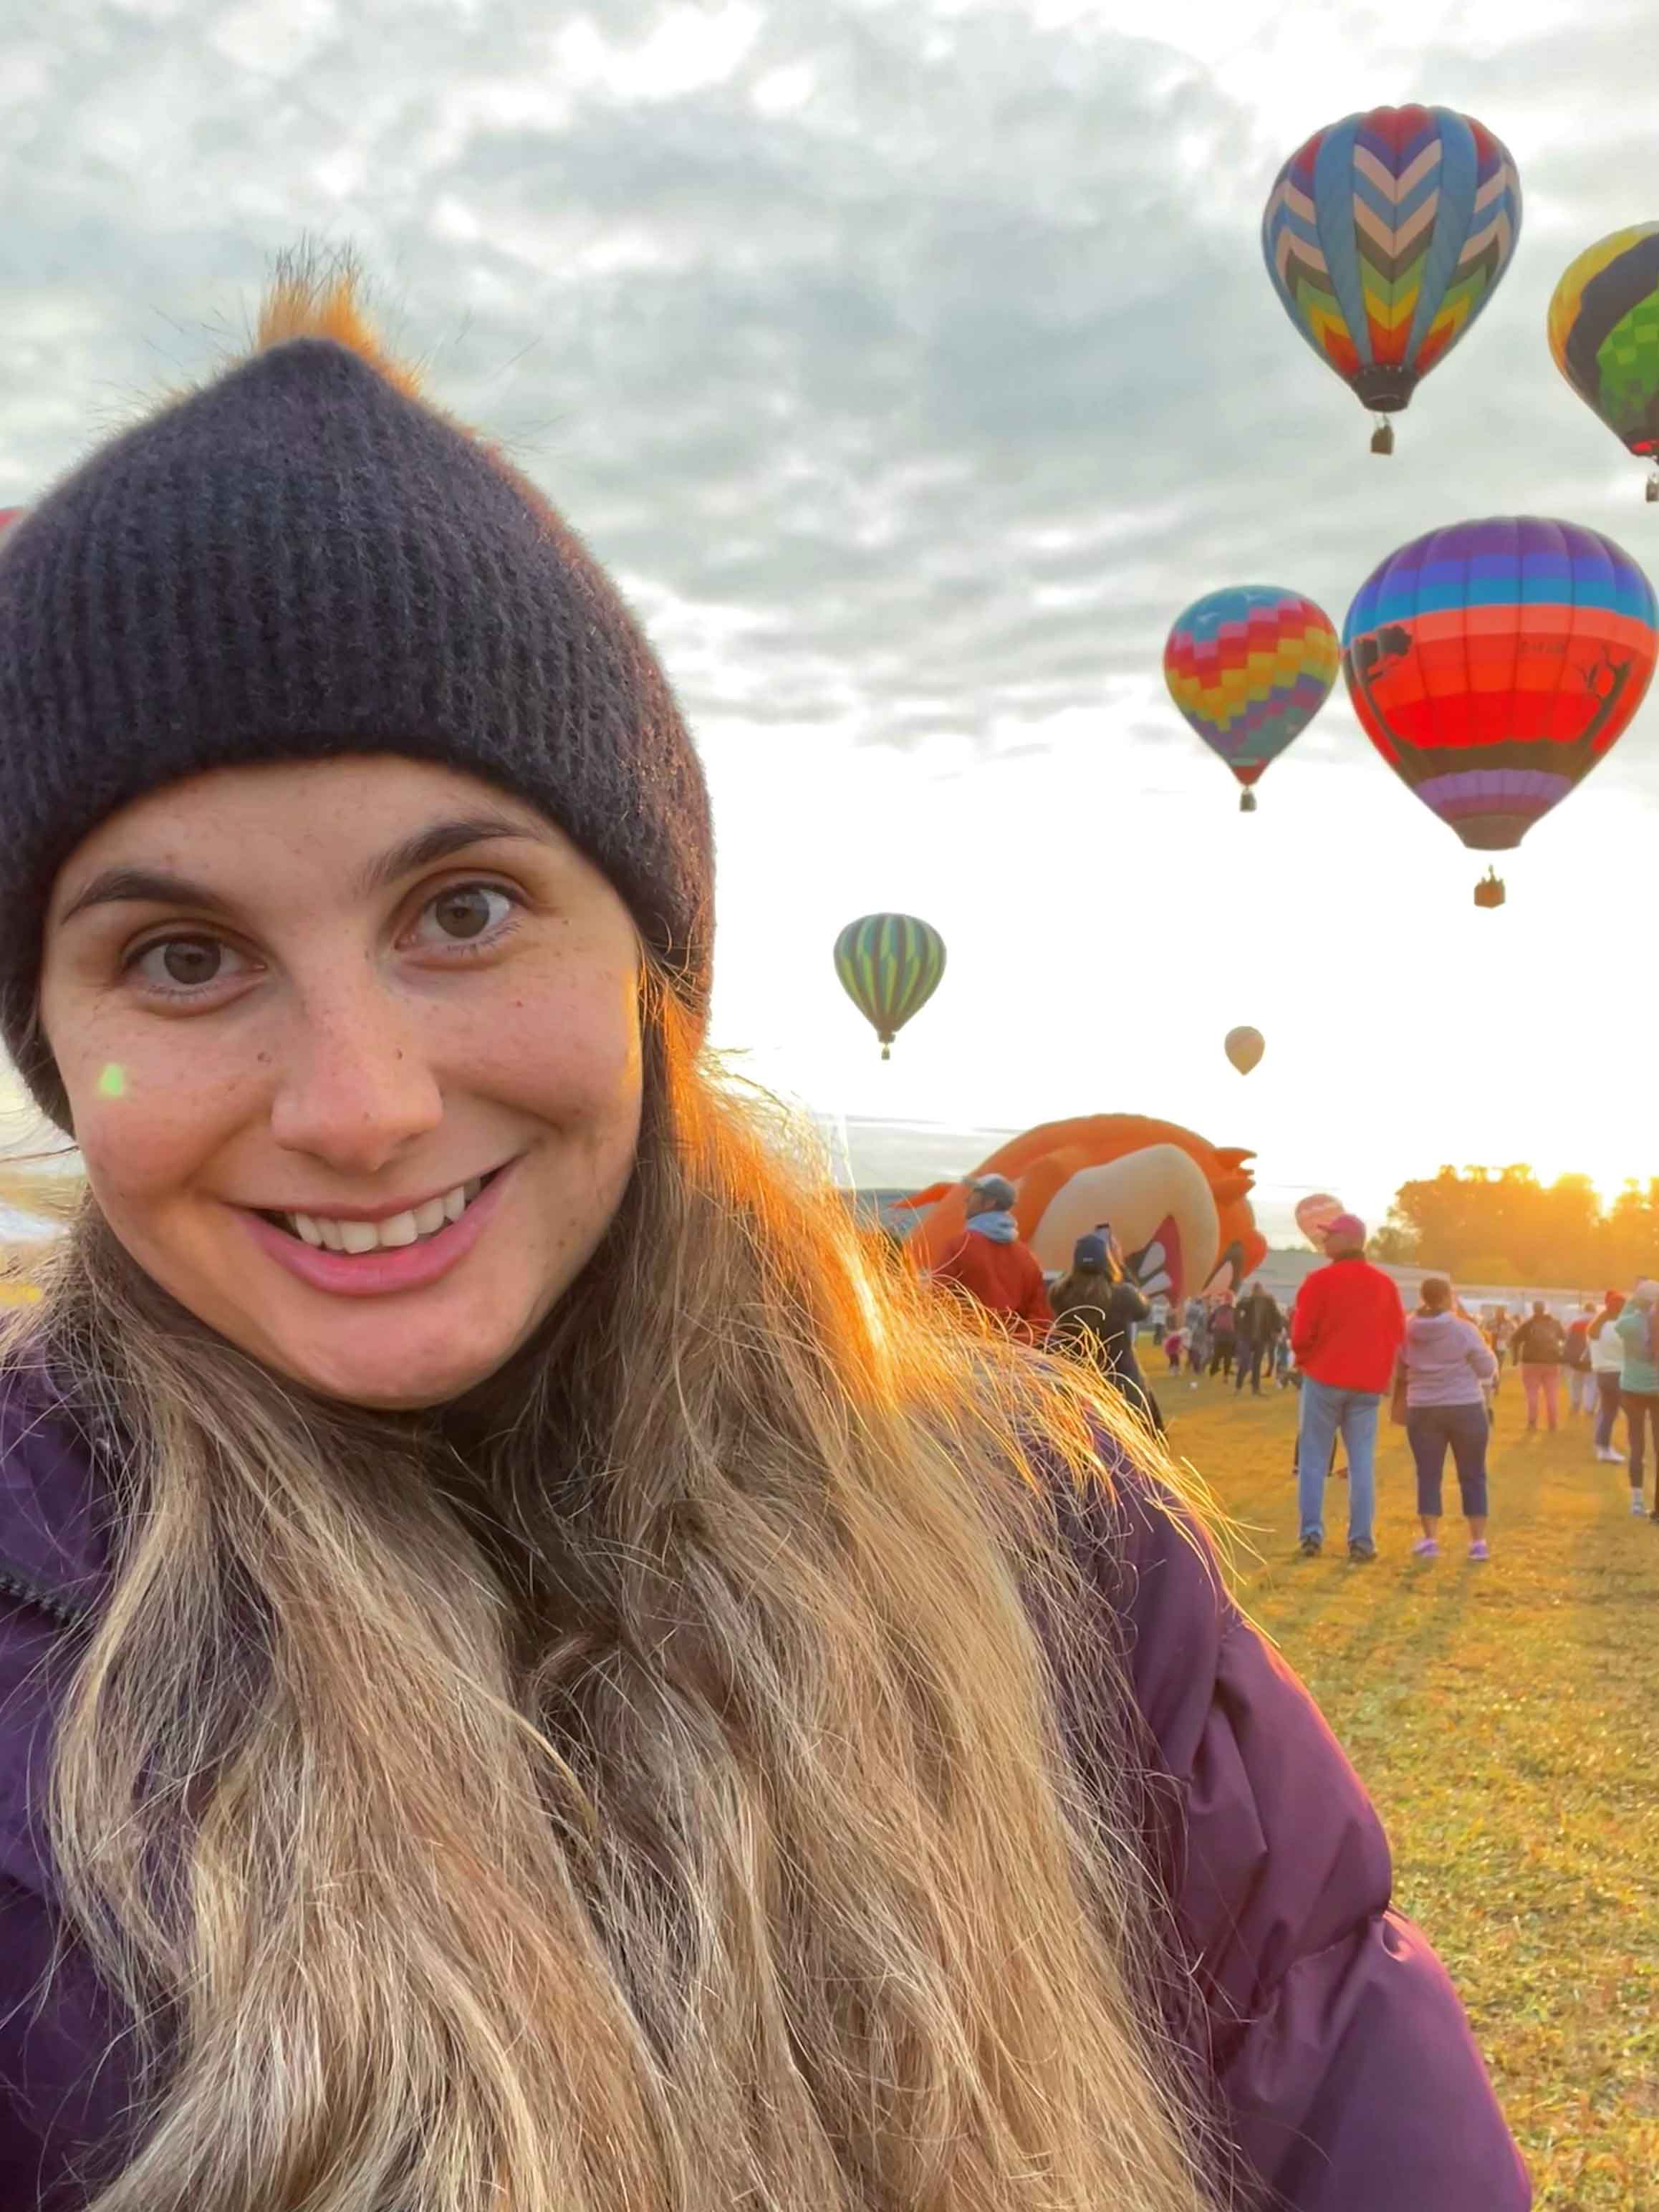 Student smiling with hot air balloons in the background